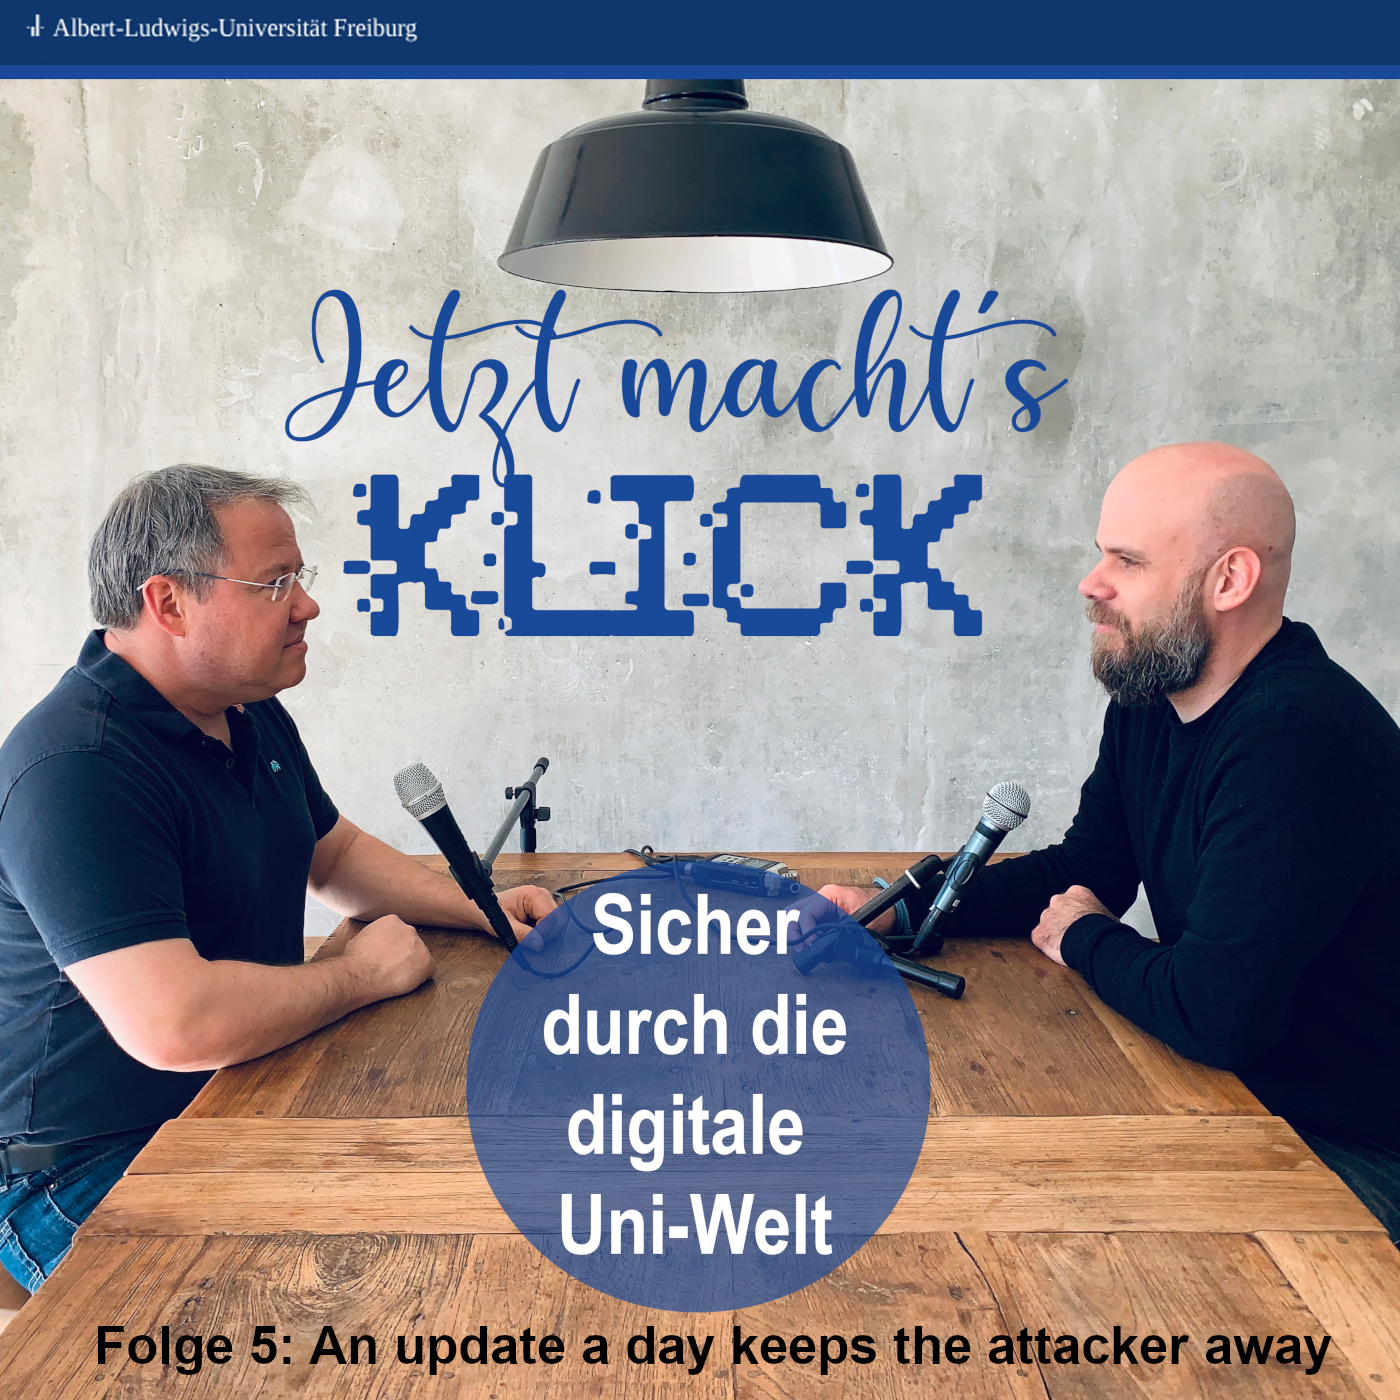 Podcast "An update a day keeps the attacker away" (Folge 5)